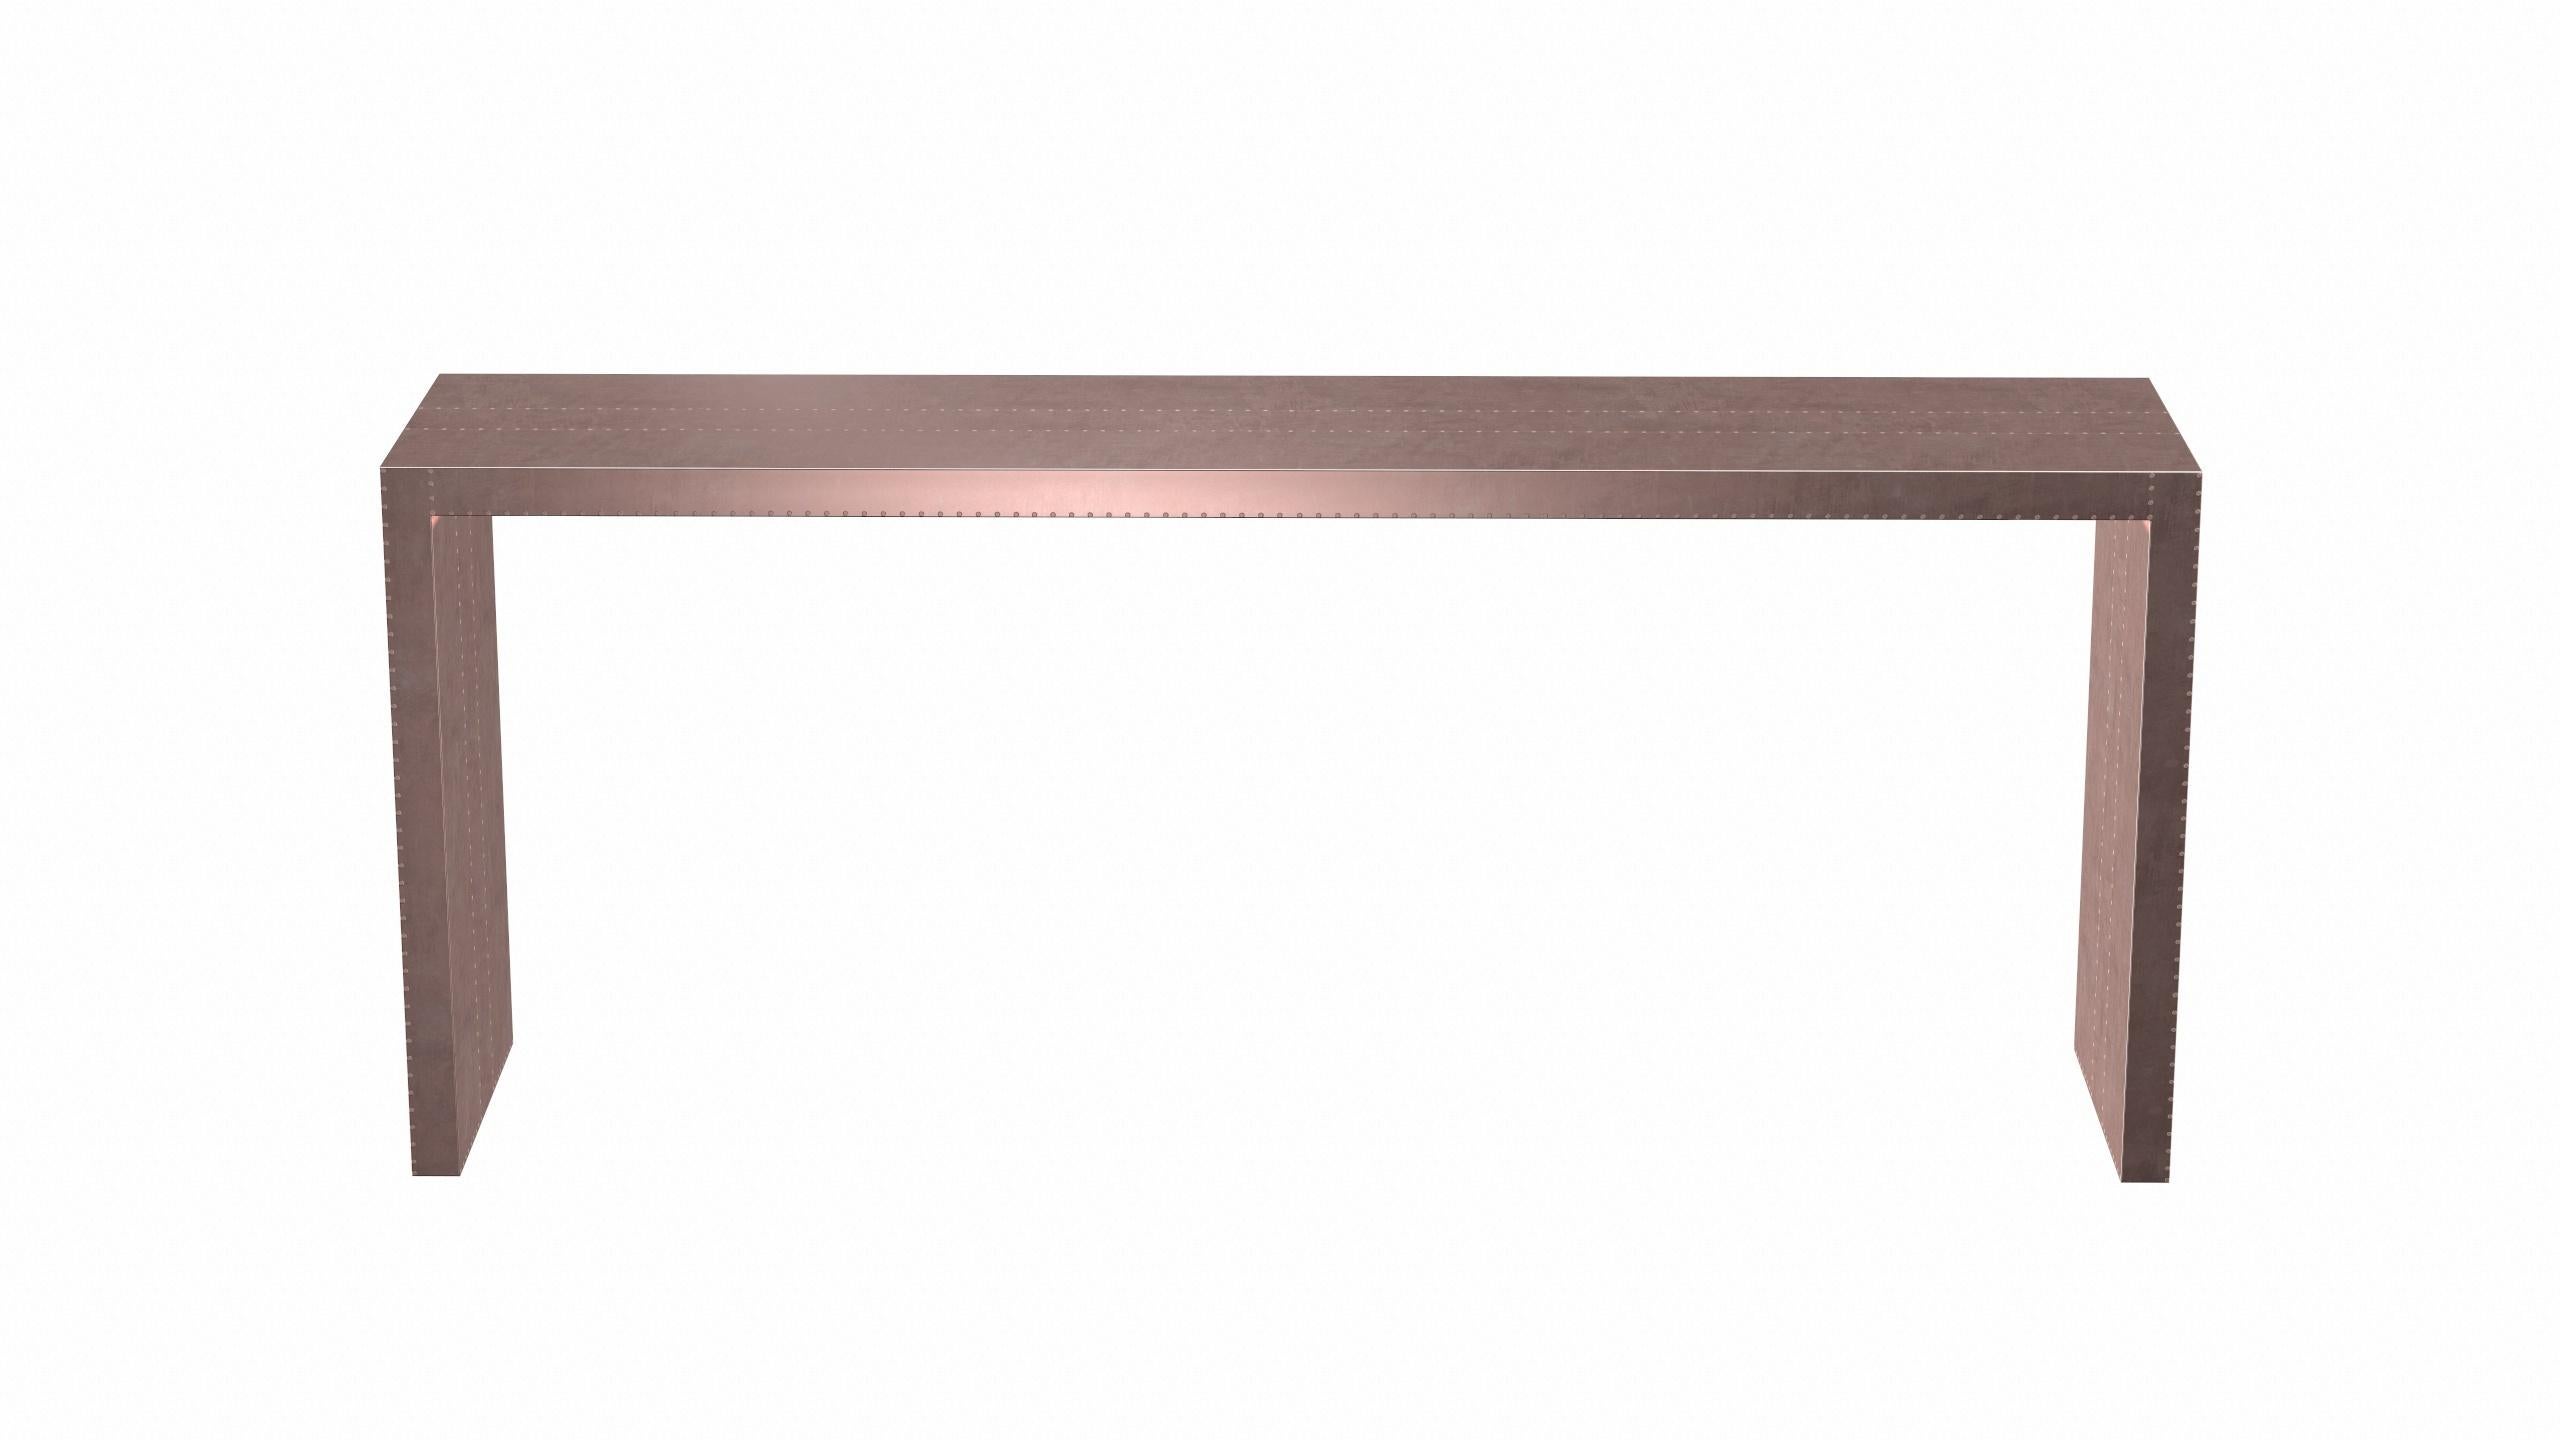 Hand-Carved Art Deco Rectangular Console Tables Smooth Copper by Alison Spear for S. Odegard For Sale